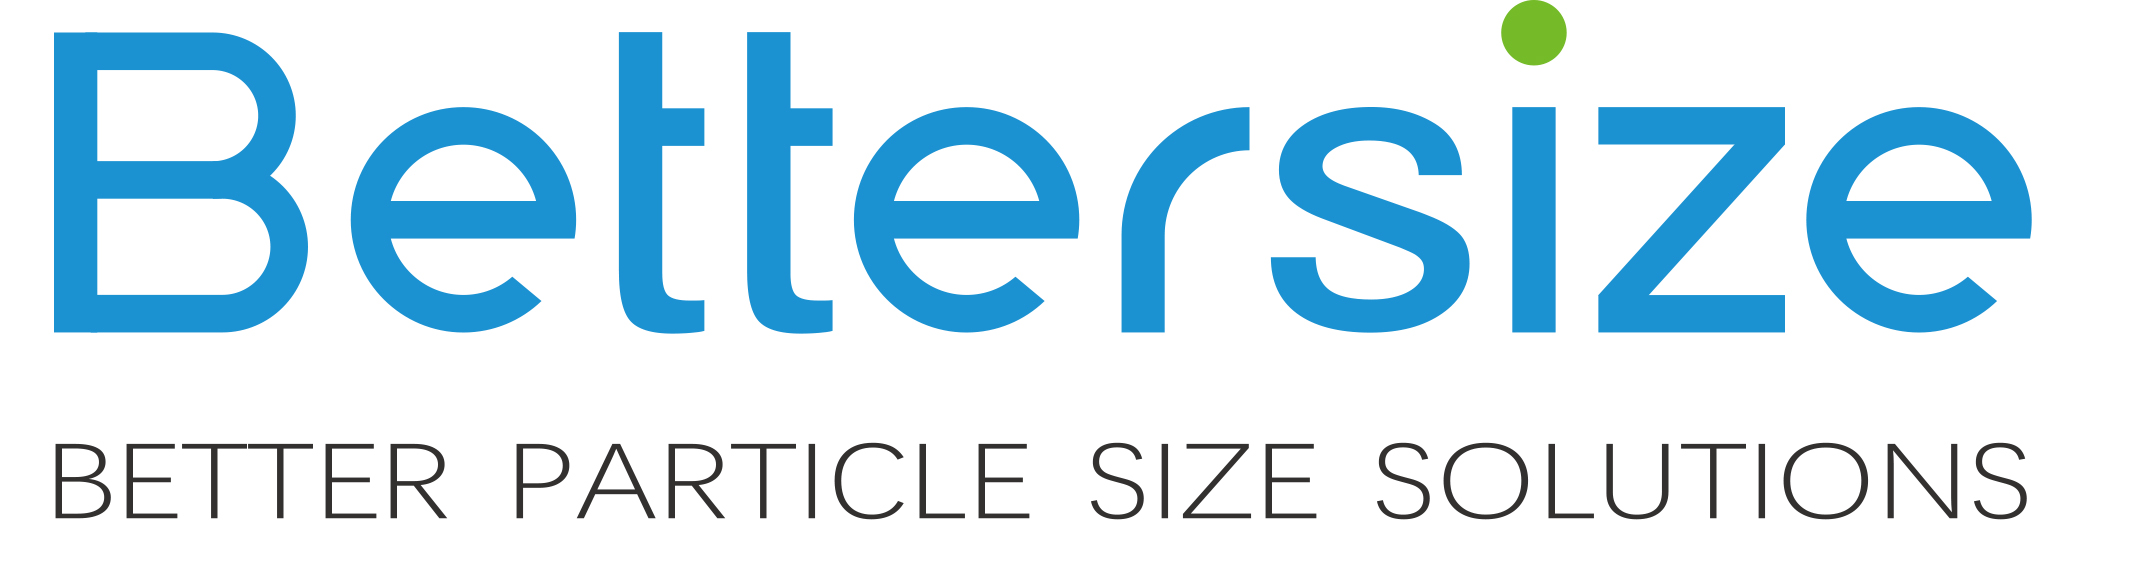 Bettersize logo with the tagline "Better Particle Size Solutions"